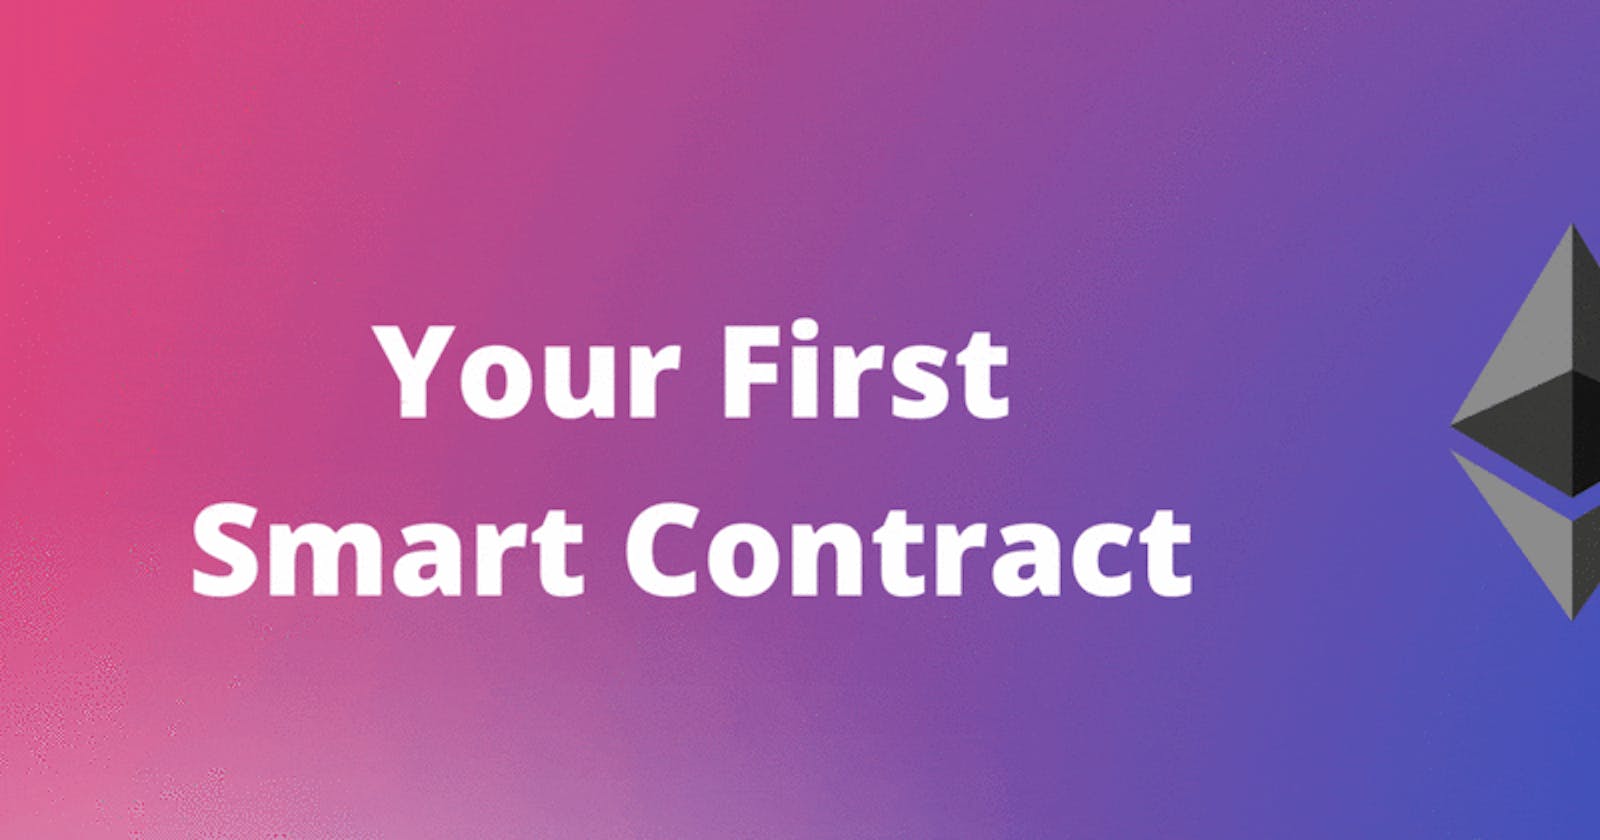 Create Your First Smart Contract